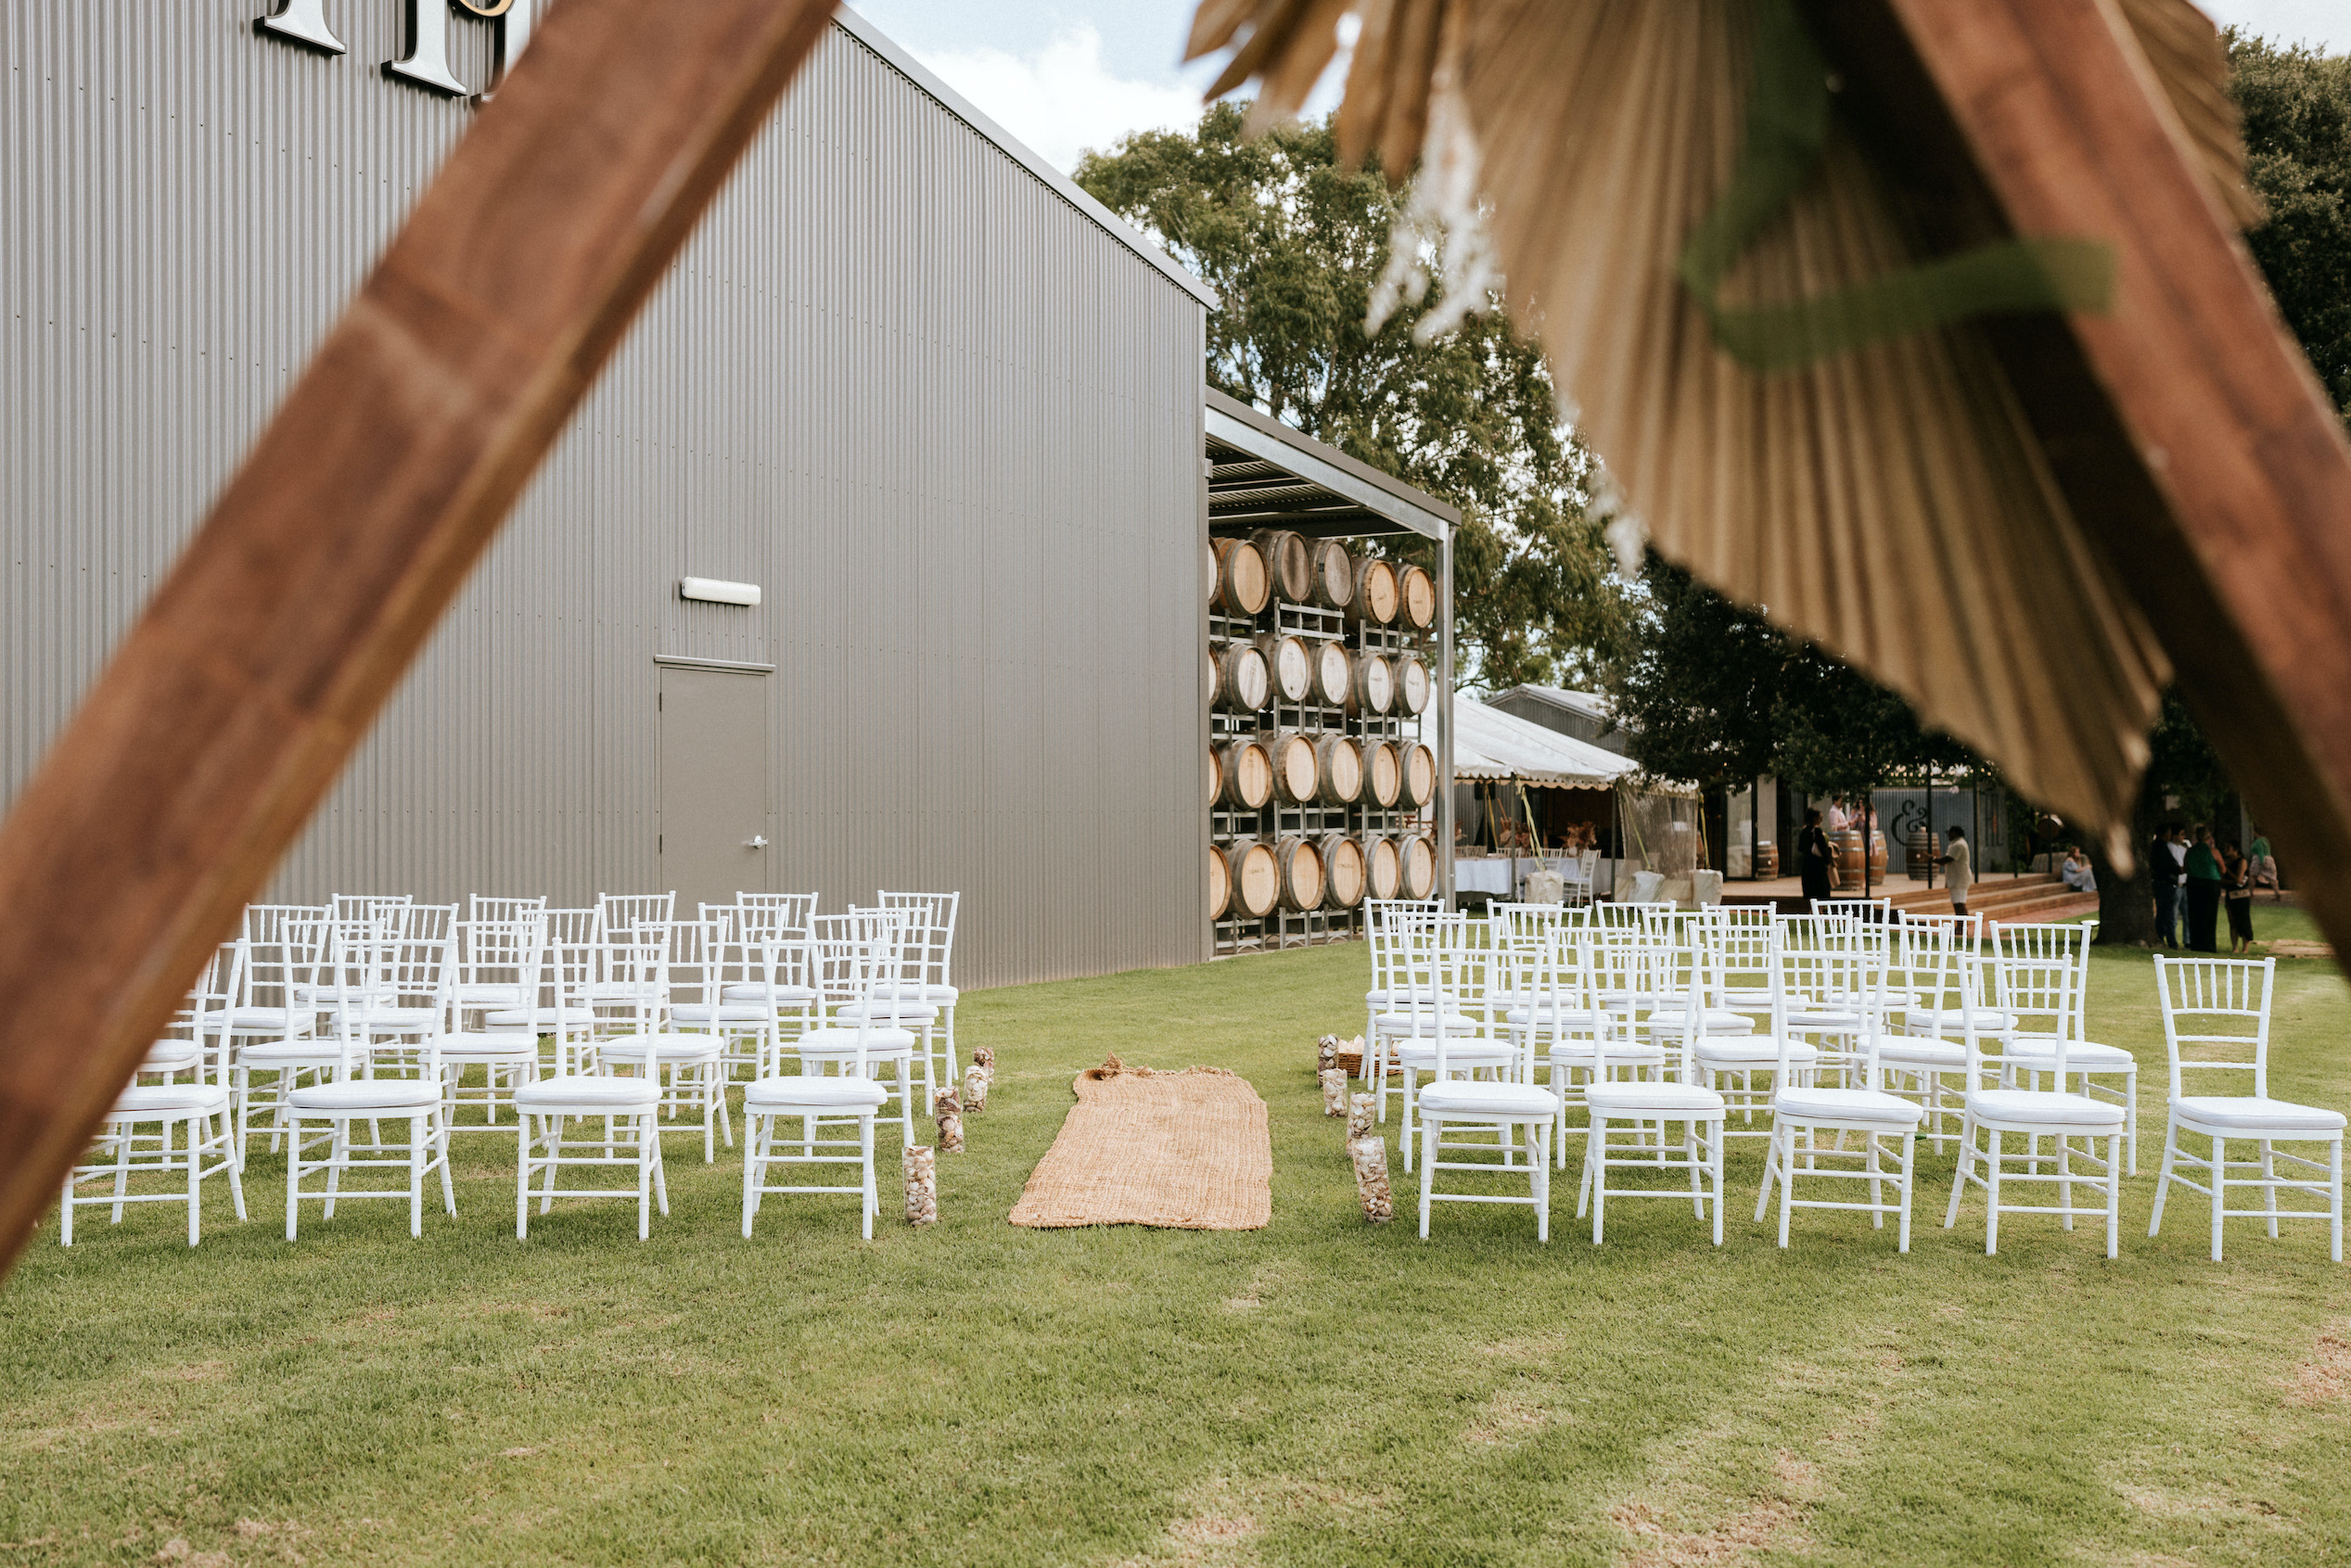 Set amongst the vines and olive orchards of Fleurieu Peninsula’s beautiful McLaren Vale, Hastwell & Lightfoot is a relaxed and flexible venue for weddings and functions, with room for a marquee and accommodation.